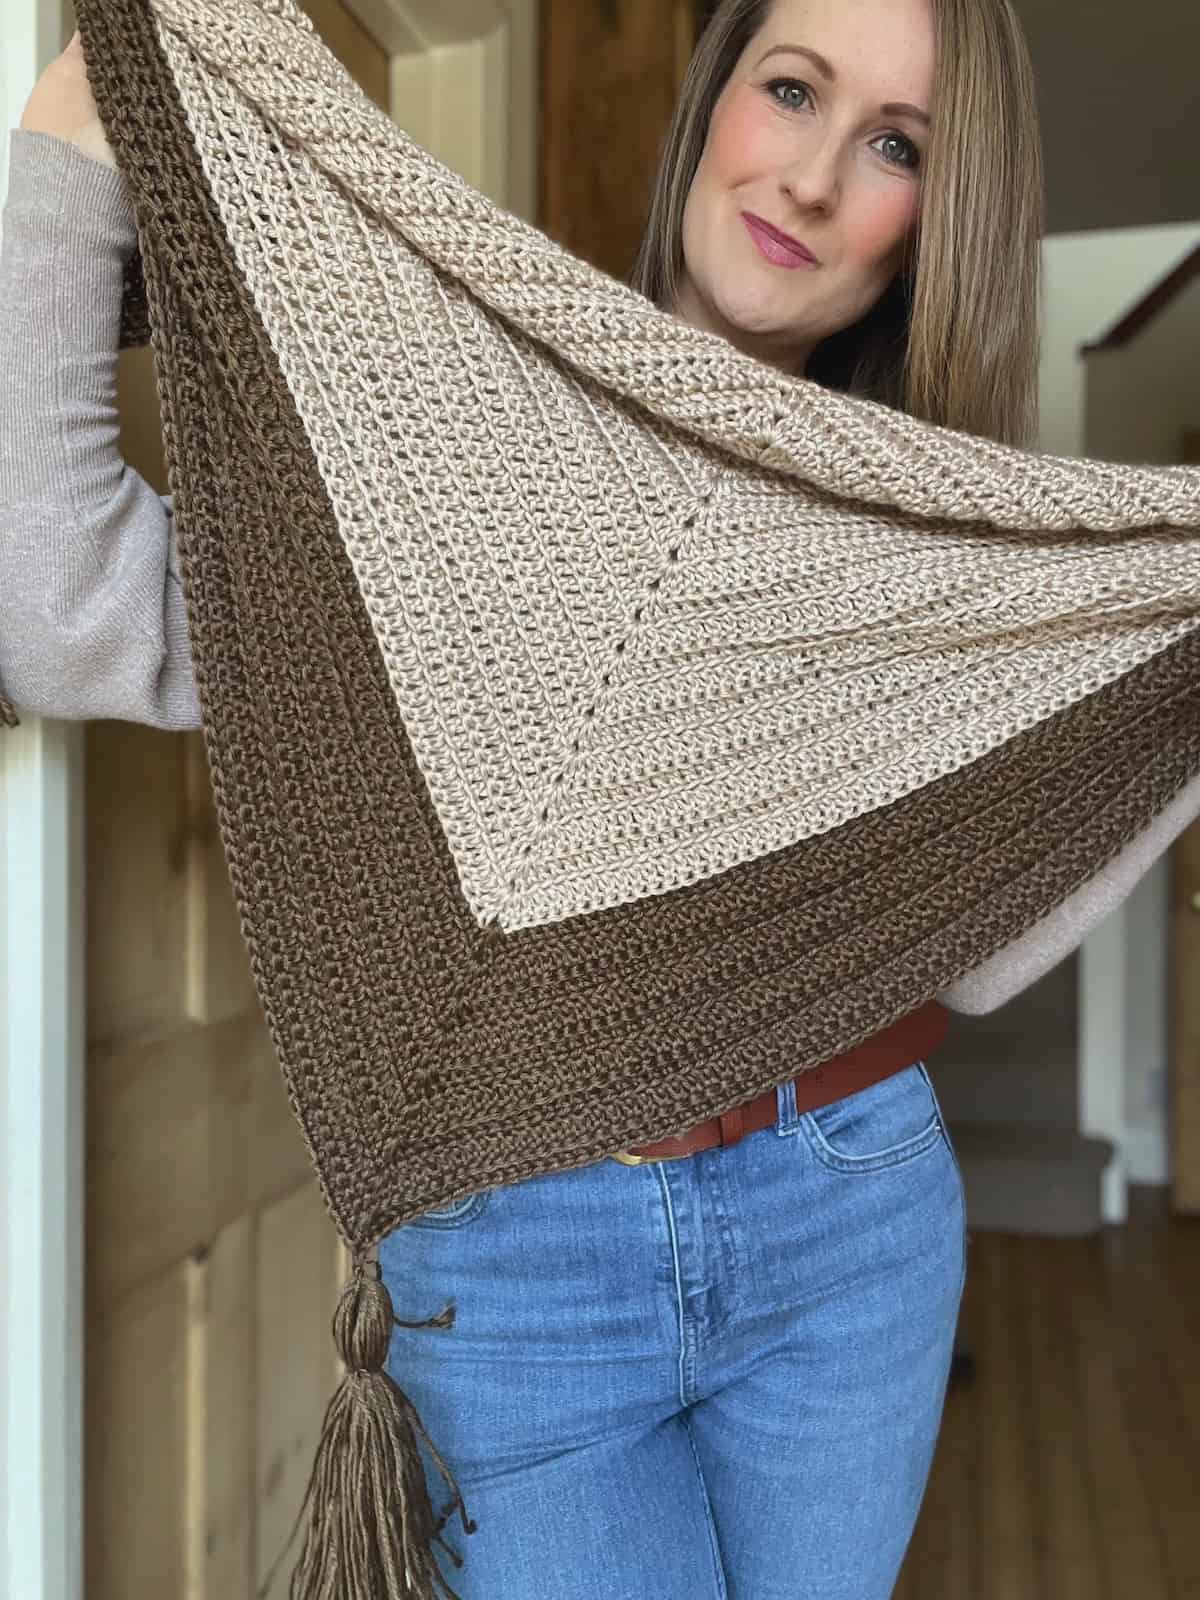 Woman holding up easy crochet shawl in cream and brown with tassels.